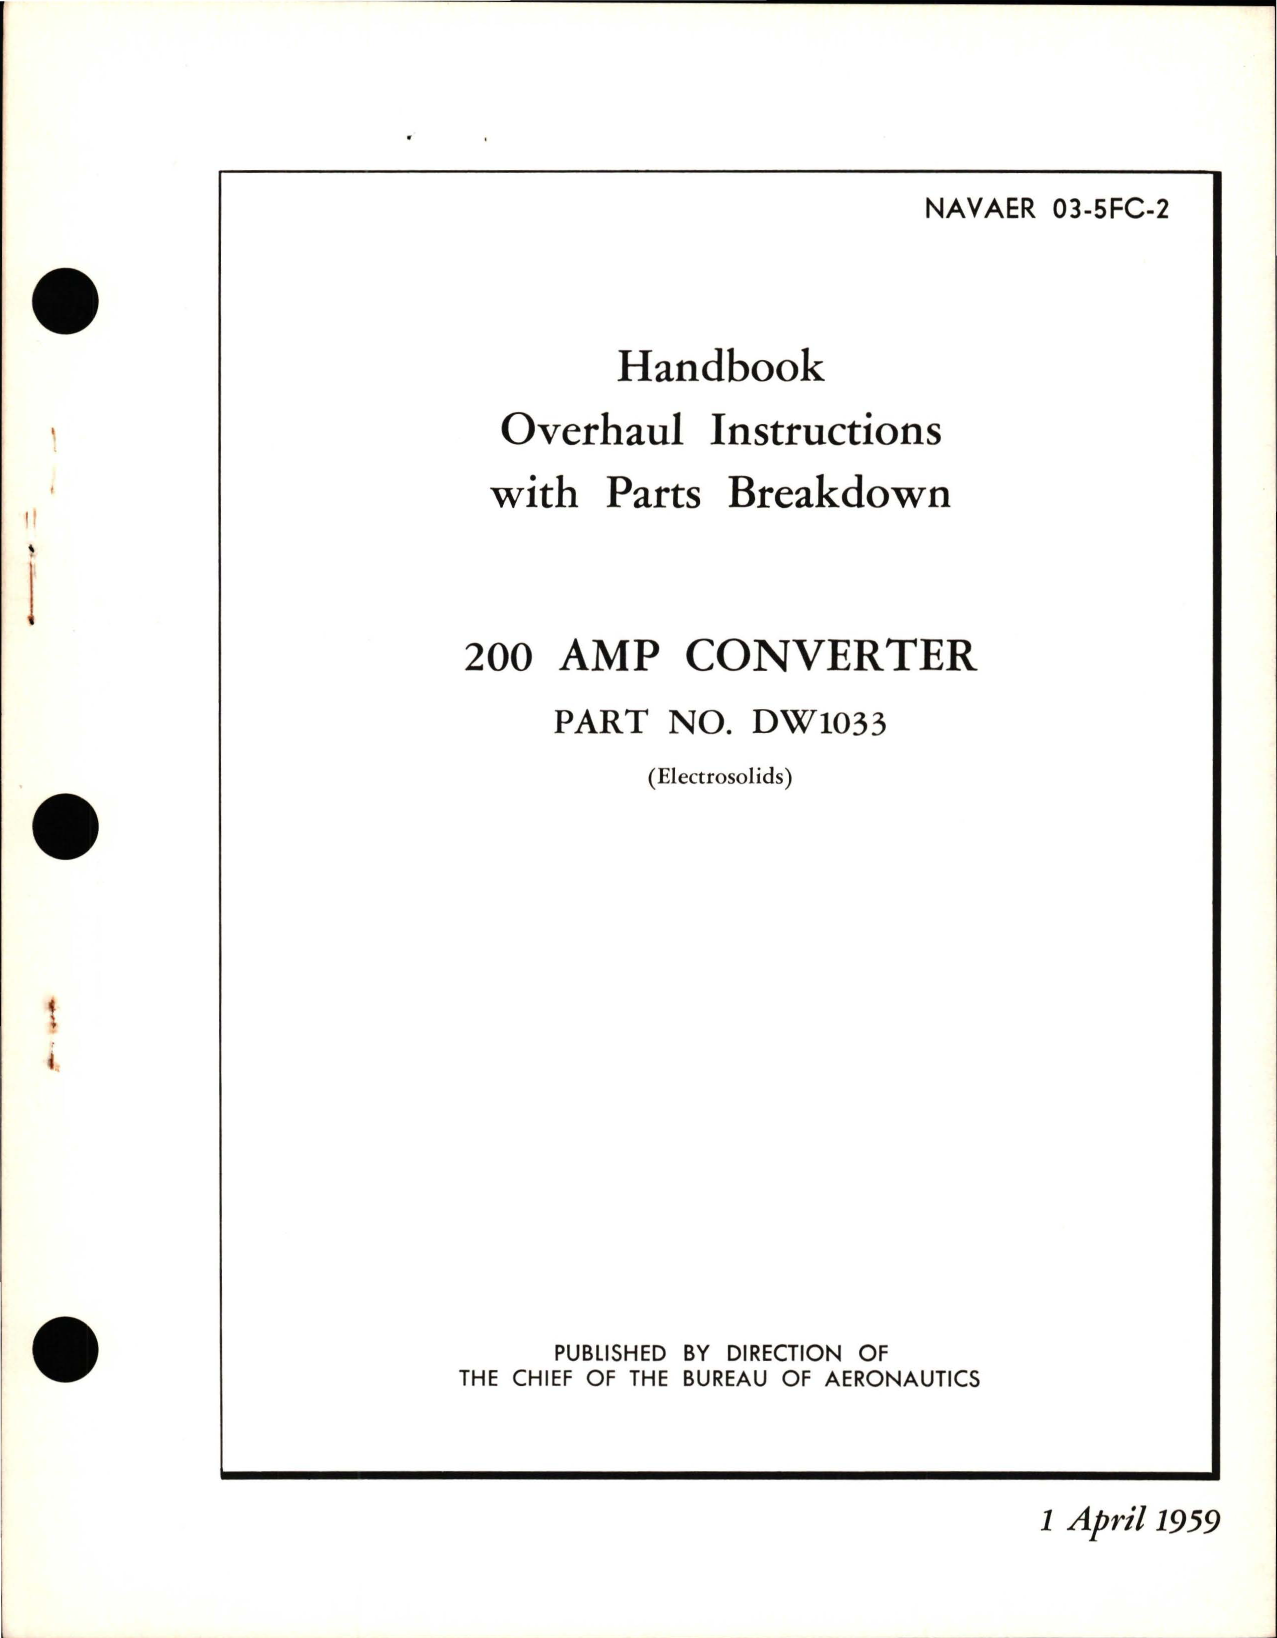 Sample page 1 from AirCorps Library document: Overhaul Instructions with Parts Breakdown for 200 Amp Converter - Part DW1033